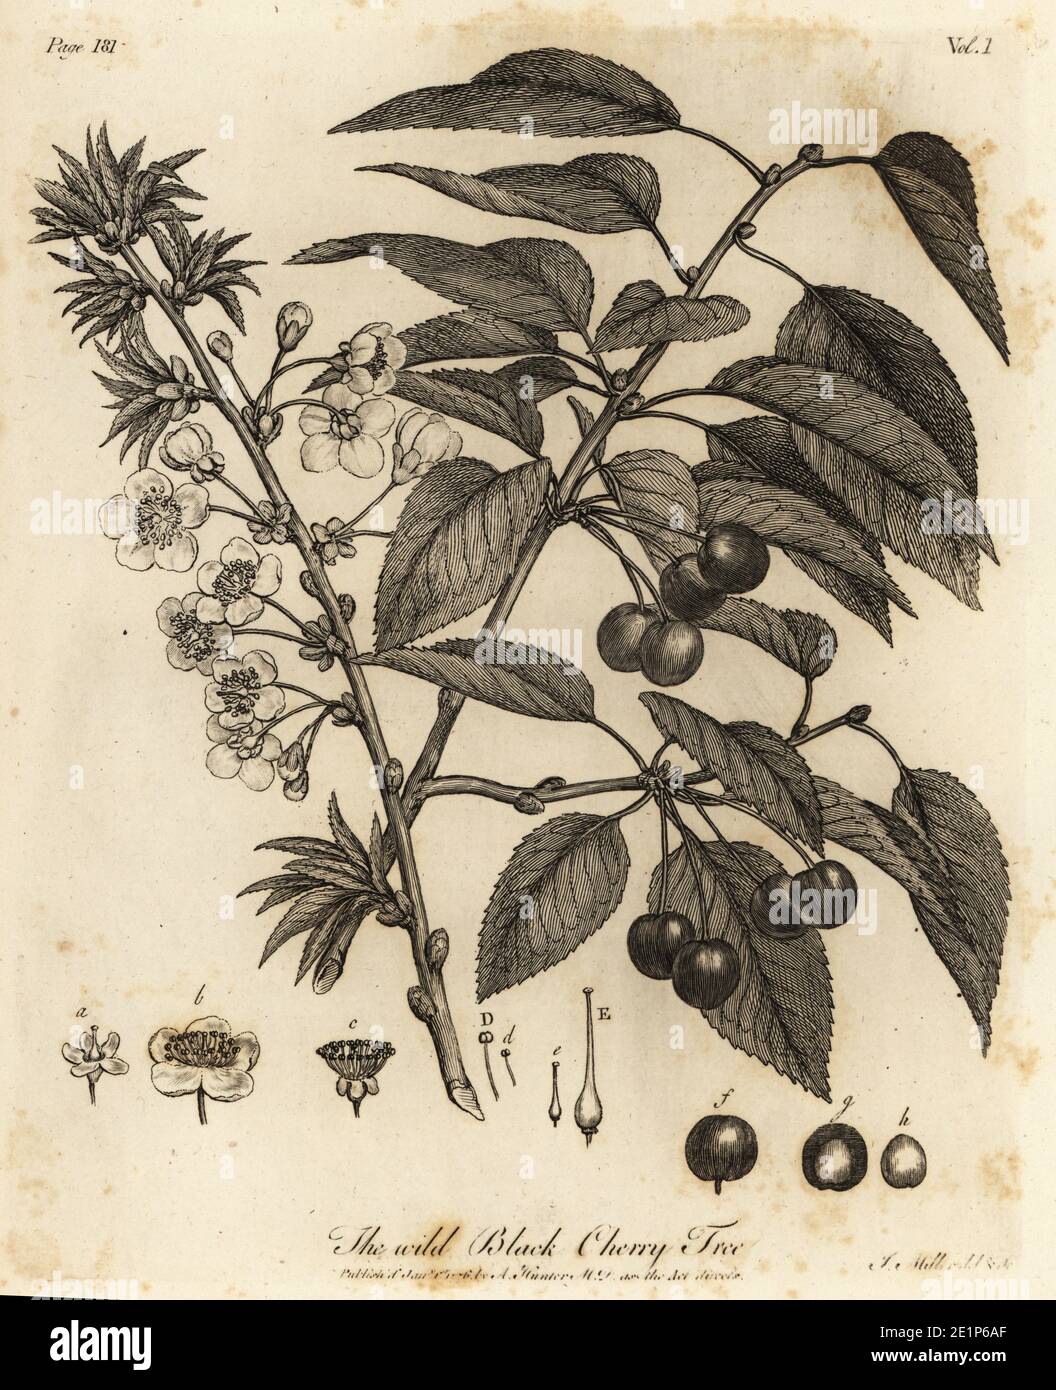 Sour cherry, tart cherry or dwarf cherry, Prunus cerasus. Wild Black Cherry Tree. Copperplate engraving drawn and engraved by John Miller (Johann Sebastian Muller) from John Evelyn’s Sylva, or A Discourse of Forest Trees and the Propagation of Timer, J. Dodsley, London, 1776. Stock Photo